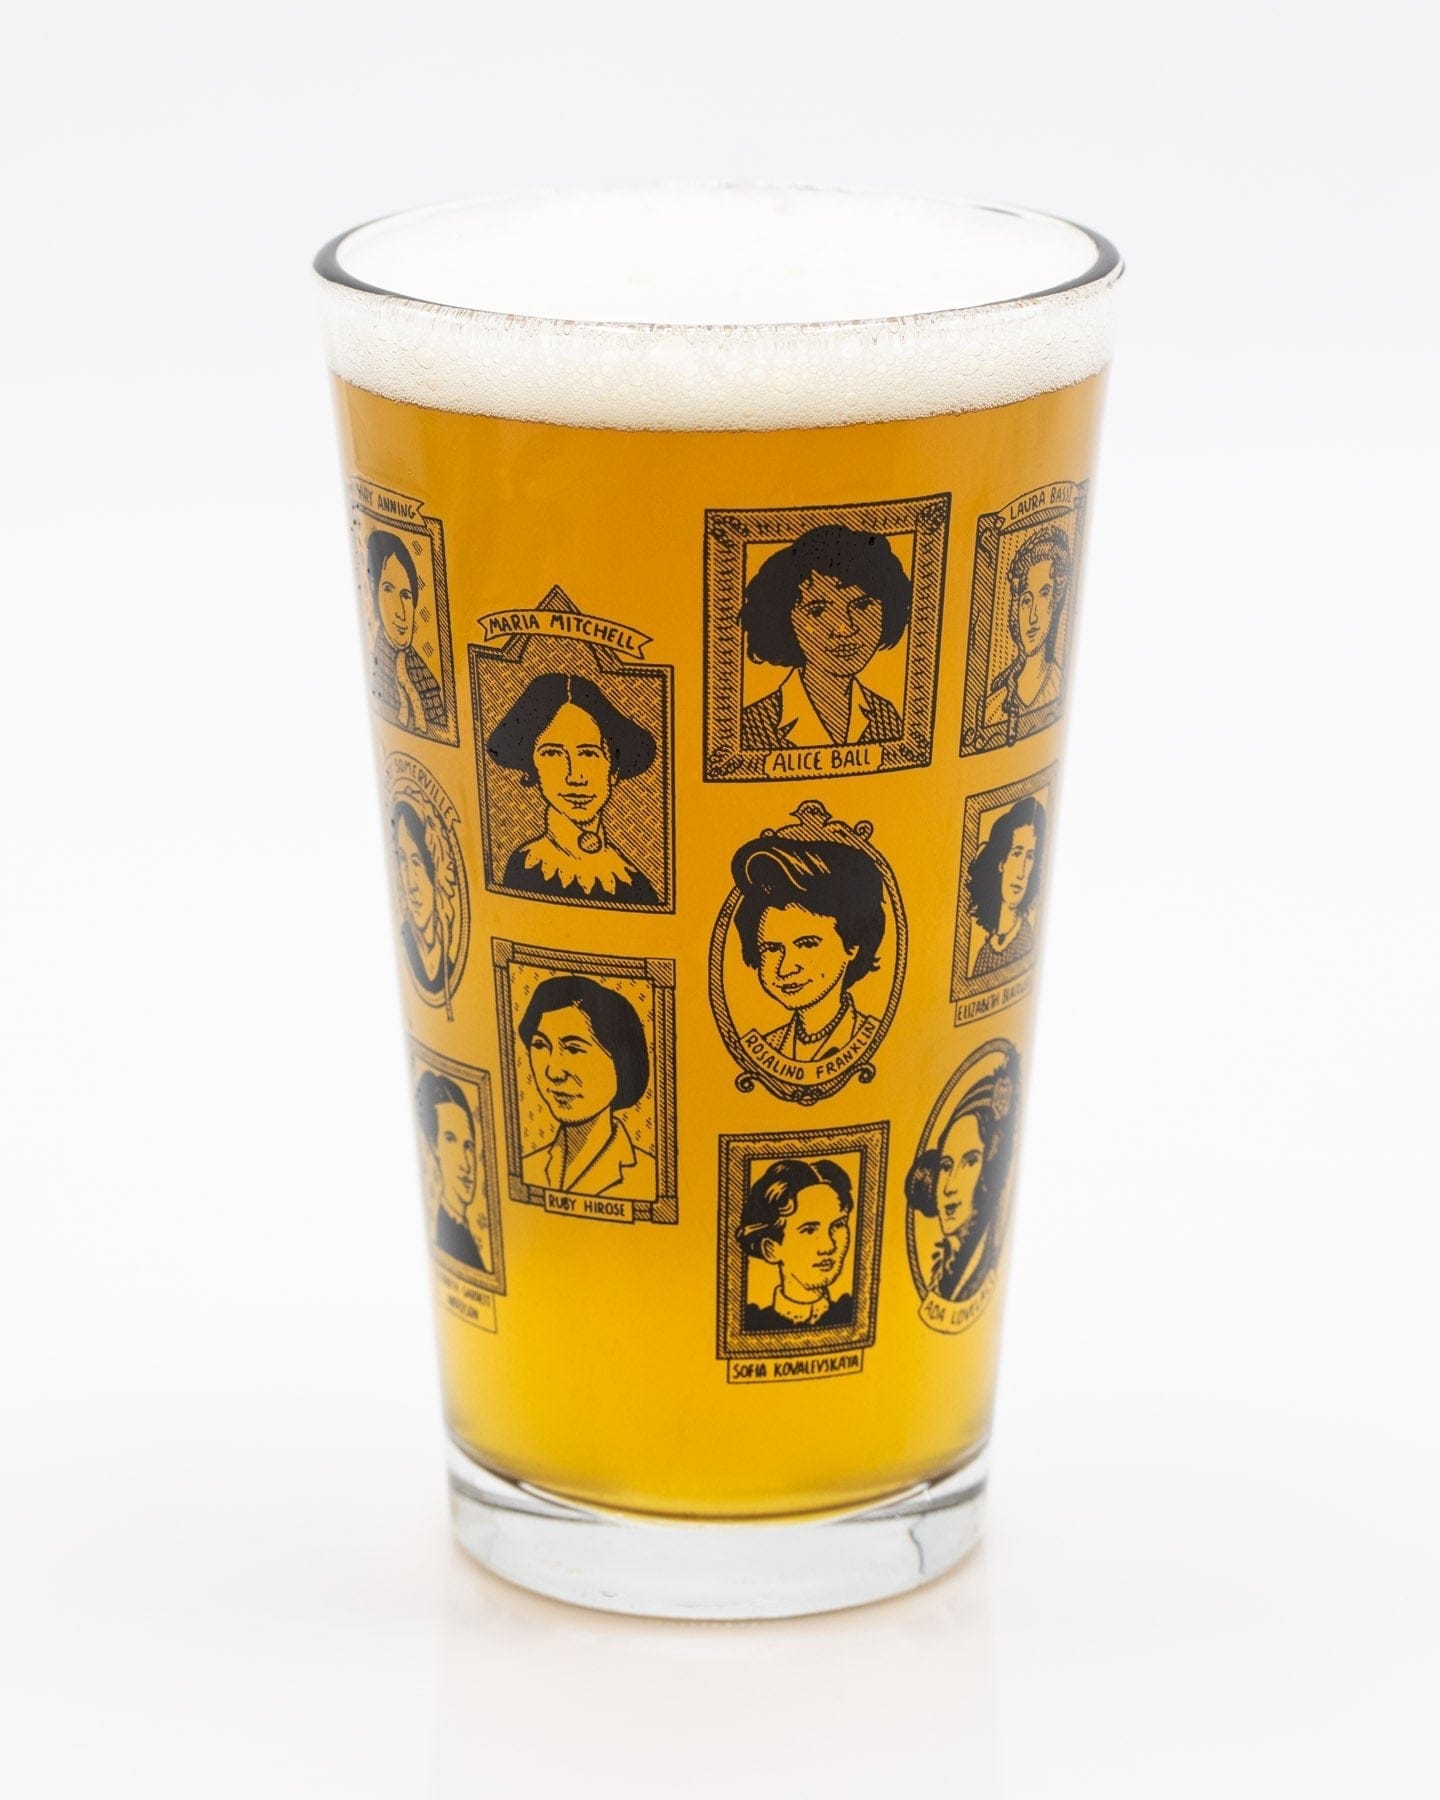 Great Women of Science Pint Glass Cognitive Surplus